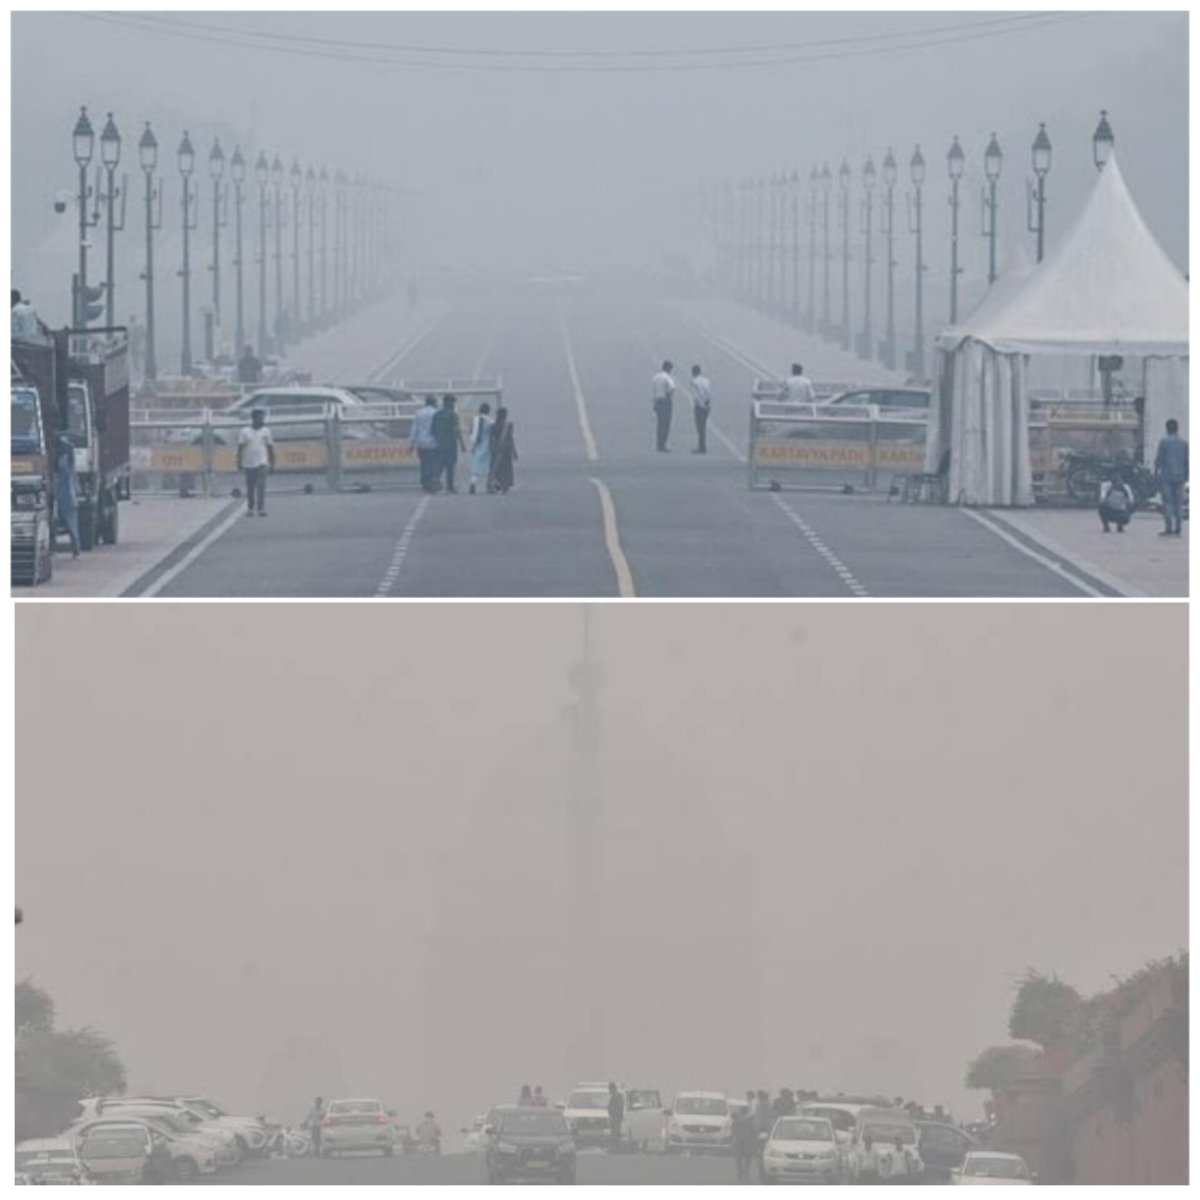 Dire situation in #Delhi as air quality hits 'severe plus.' Urgent measures needed to combat the hazardous pollution levels.

Read more details on shorts91.com/category/india

 #DelhiAirEmergency #DelhiPollution #DelhiAirQuality #ArvindKejriwal #DelhiInGasChamber #AirPollution